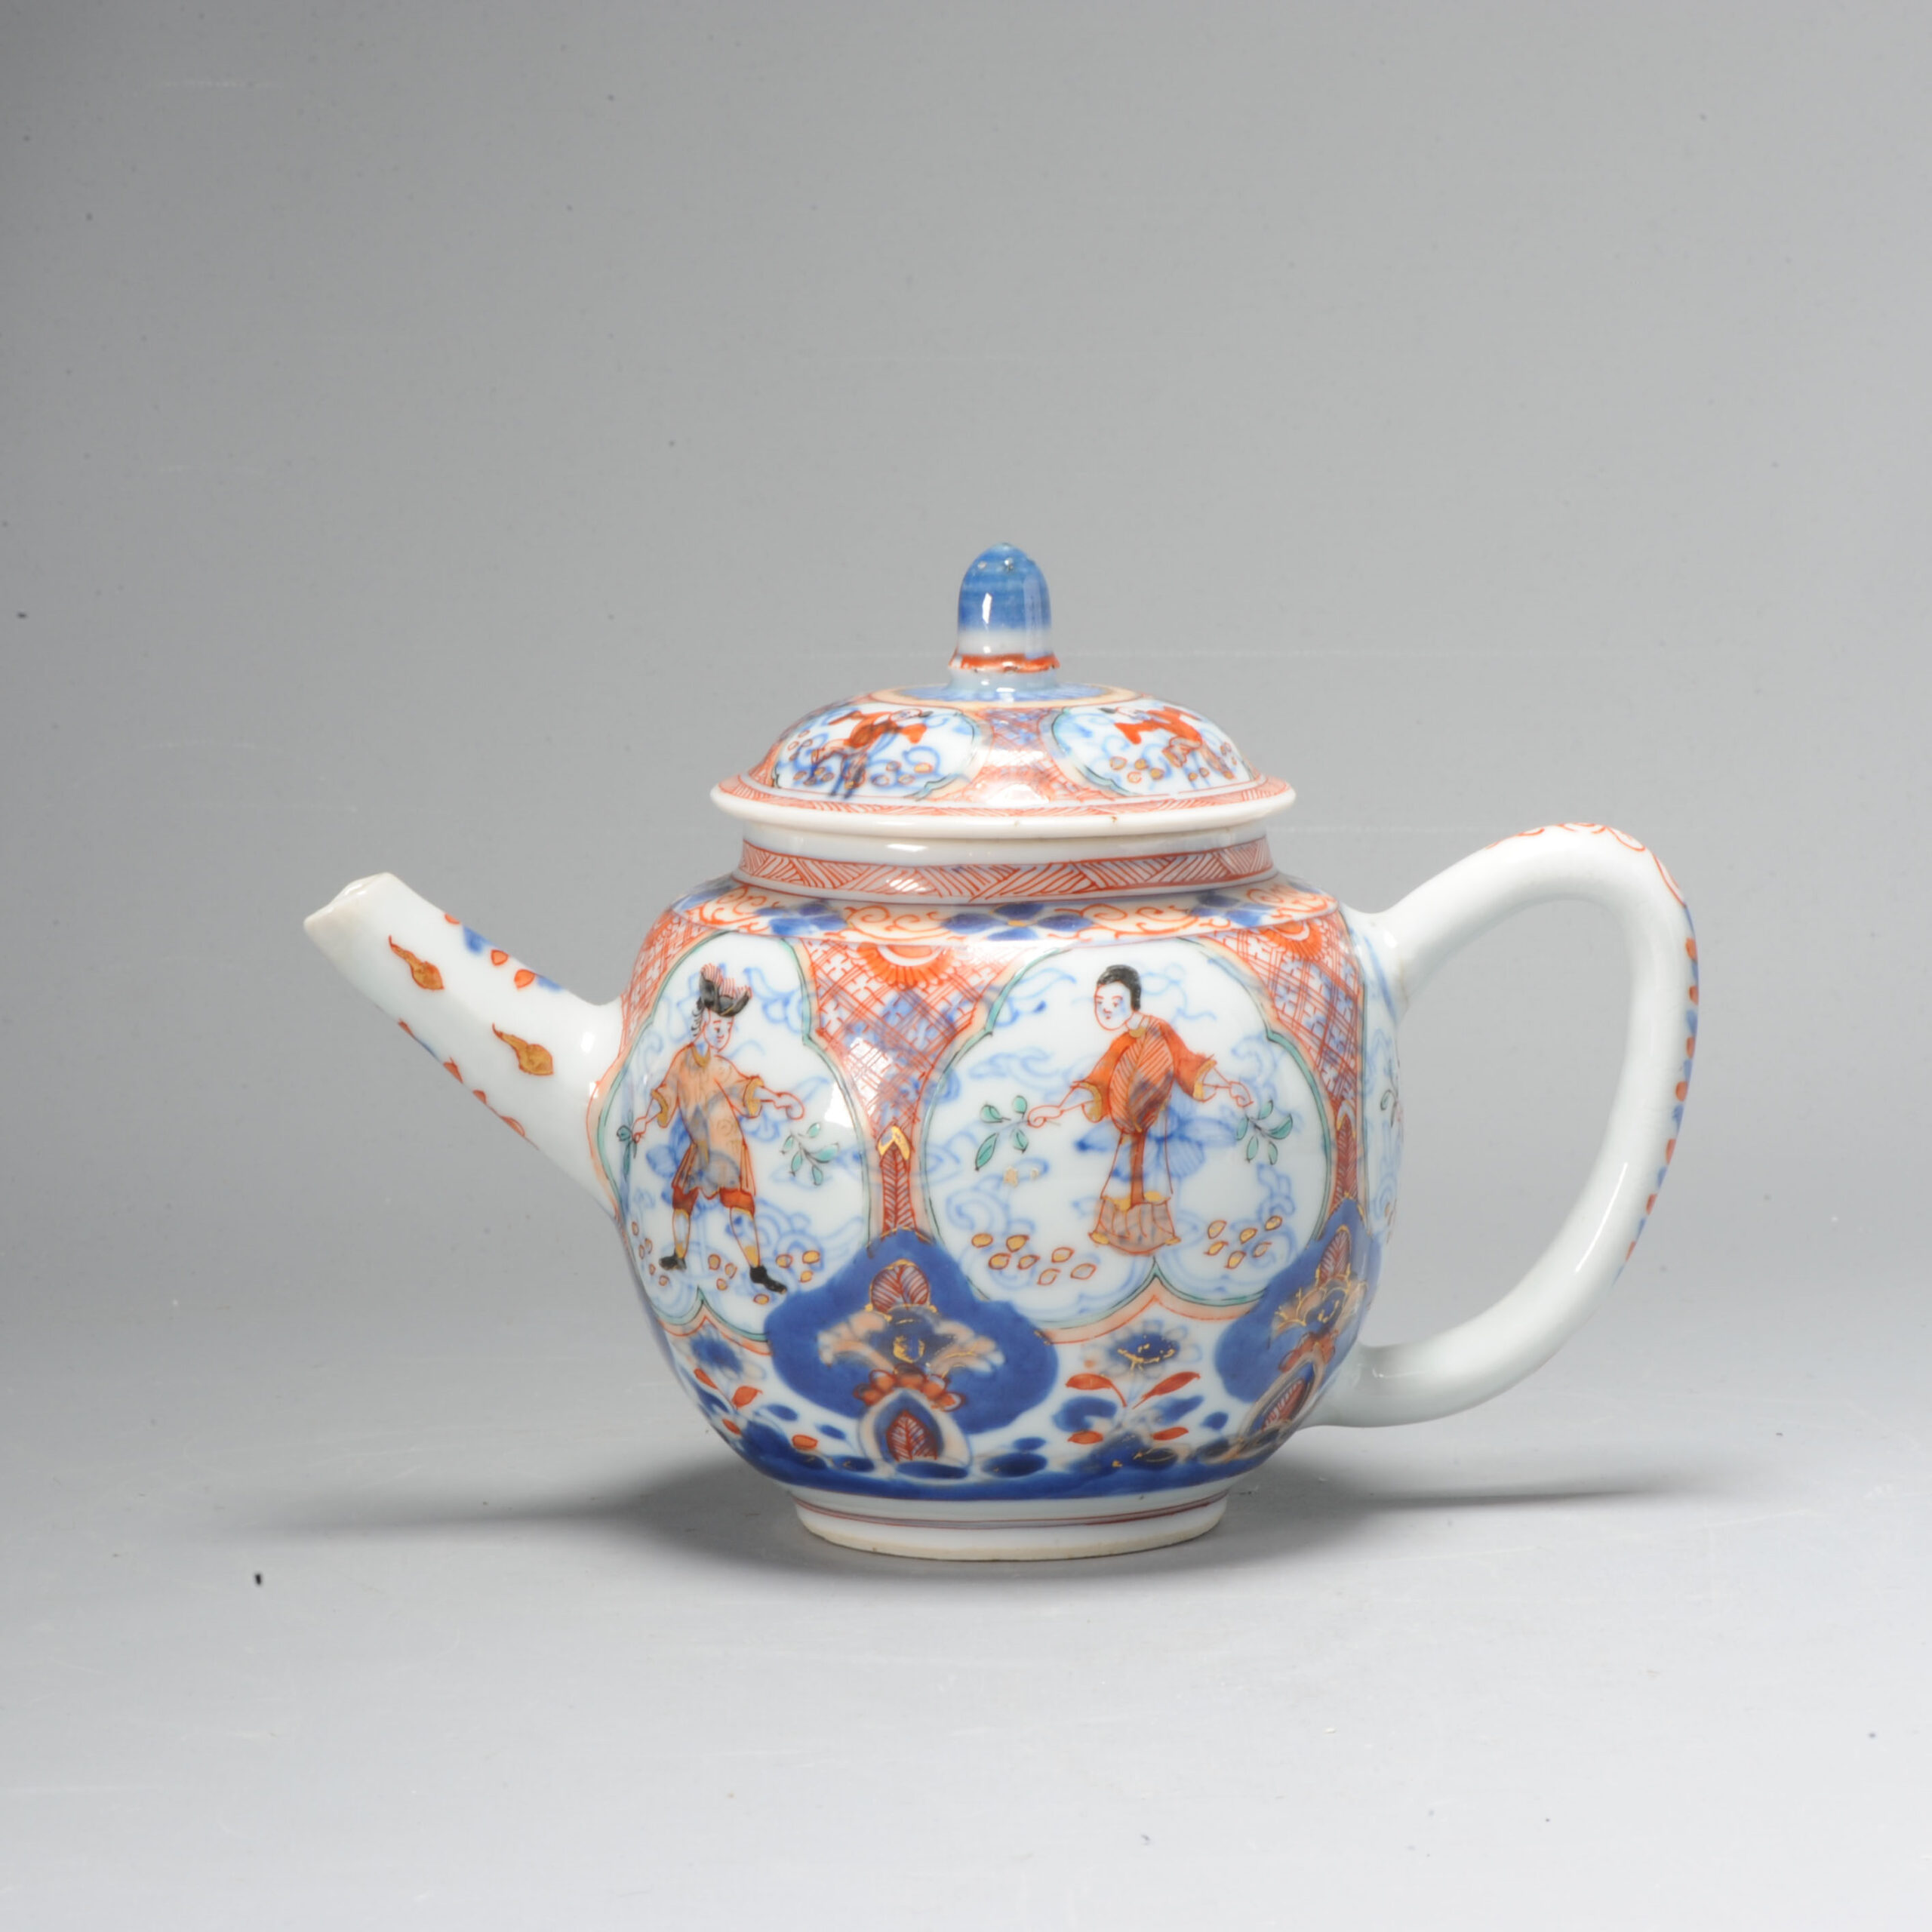 1066 Very nice Chinese Teapot. Repainted in Holland. Amsterdam Bont